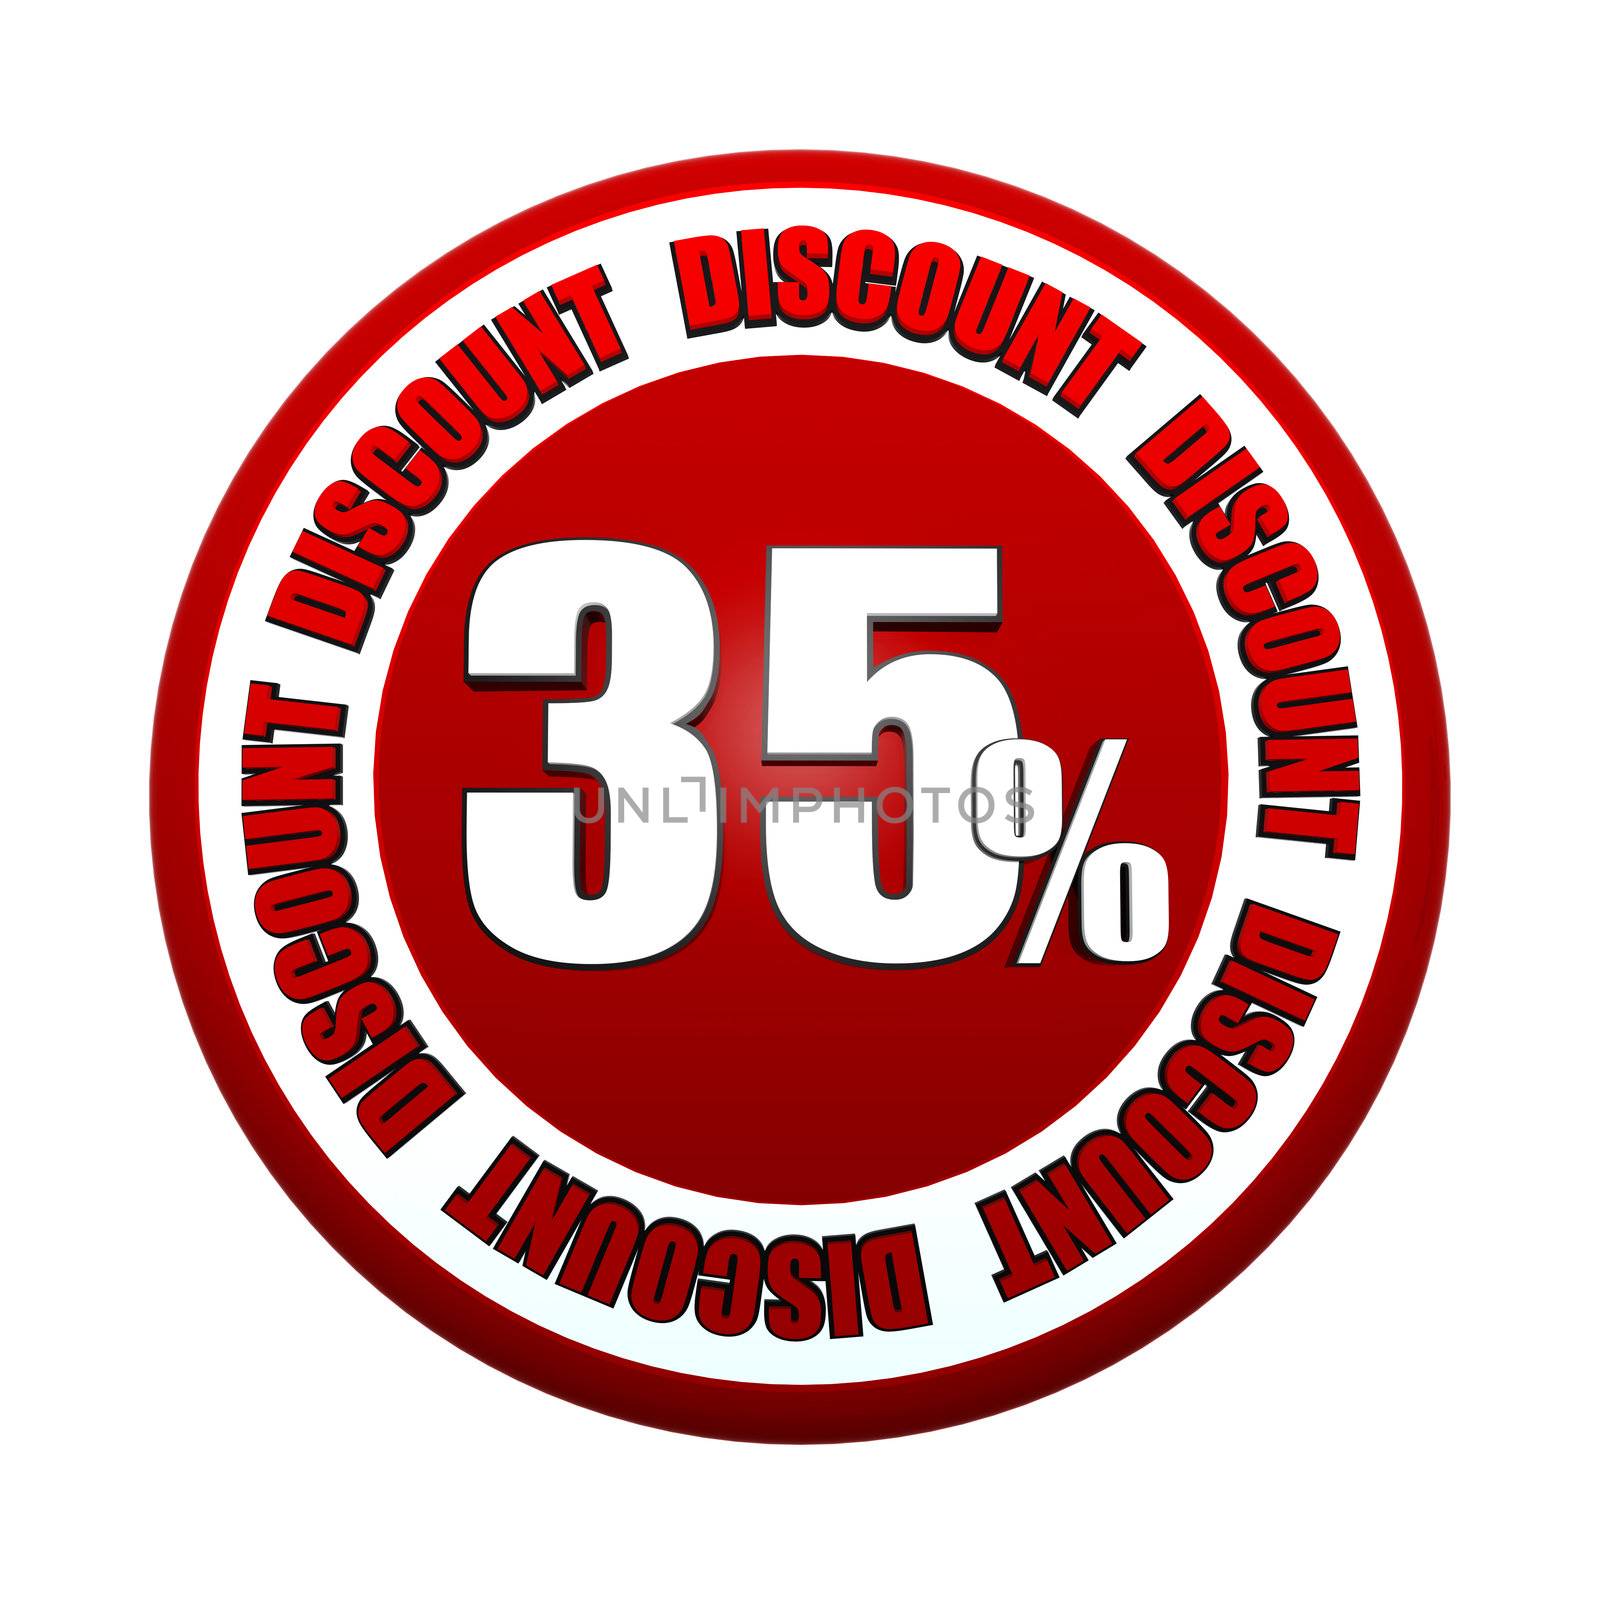 35 percentages discount - 3d red white circle label with text, business concept